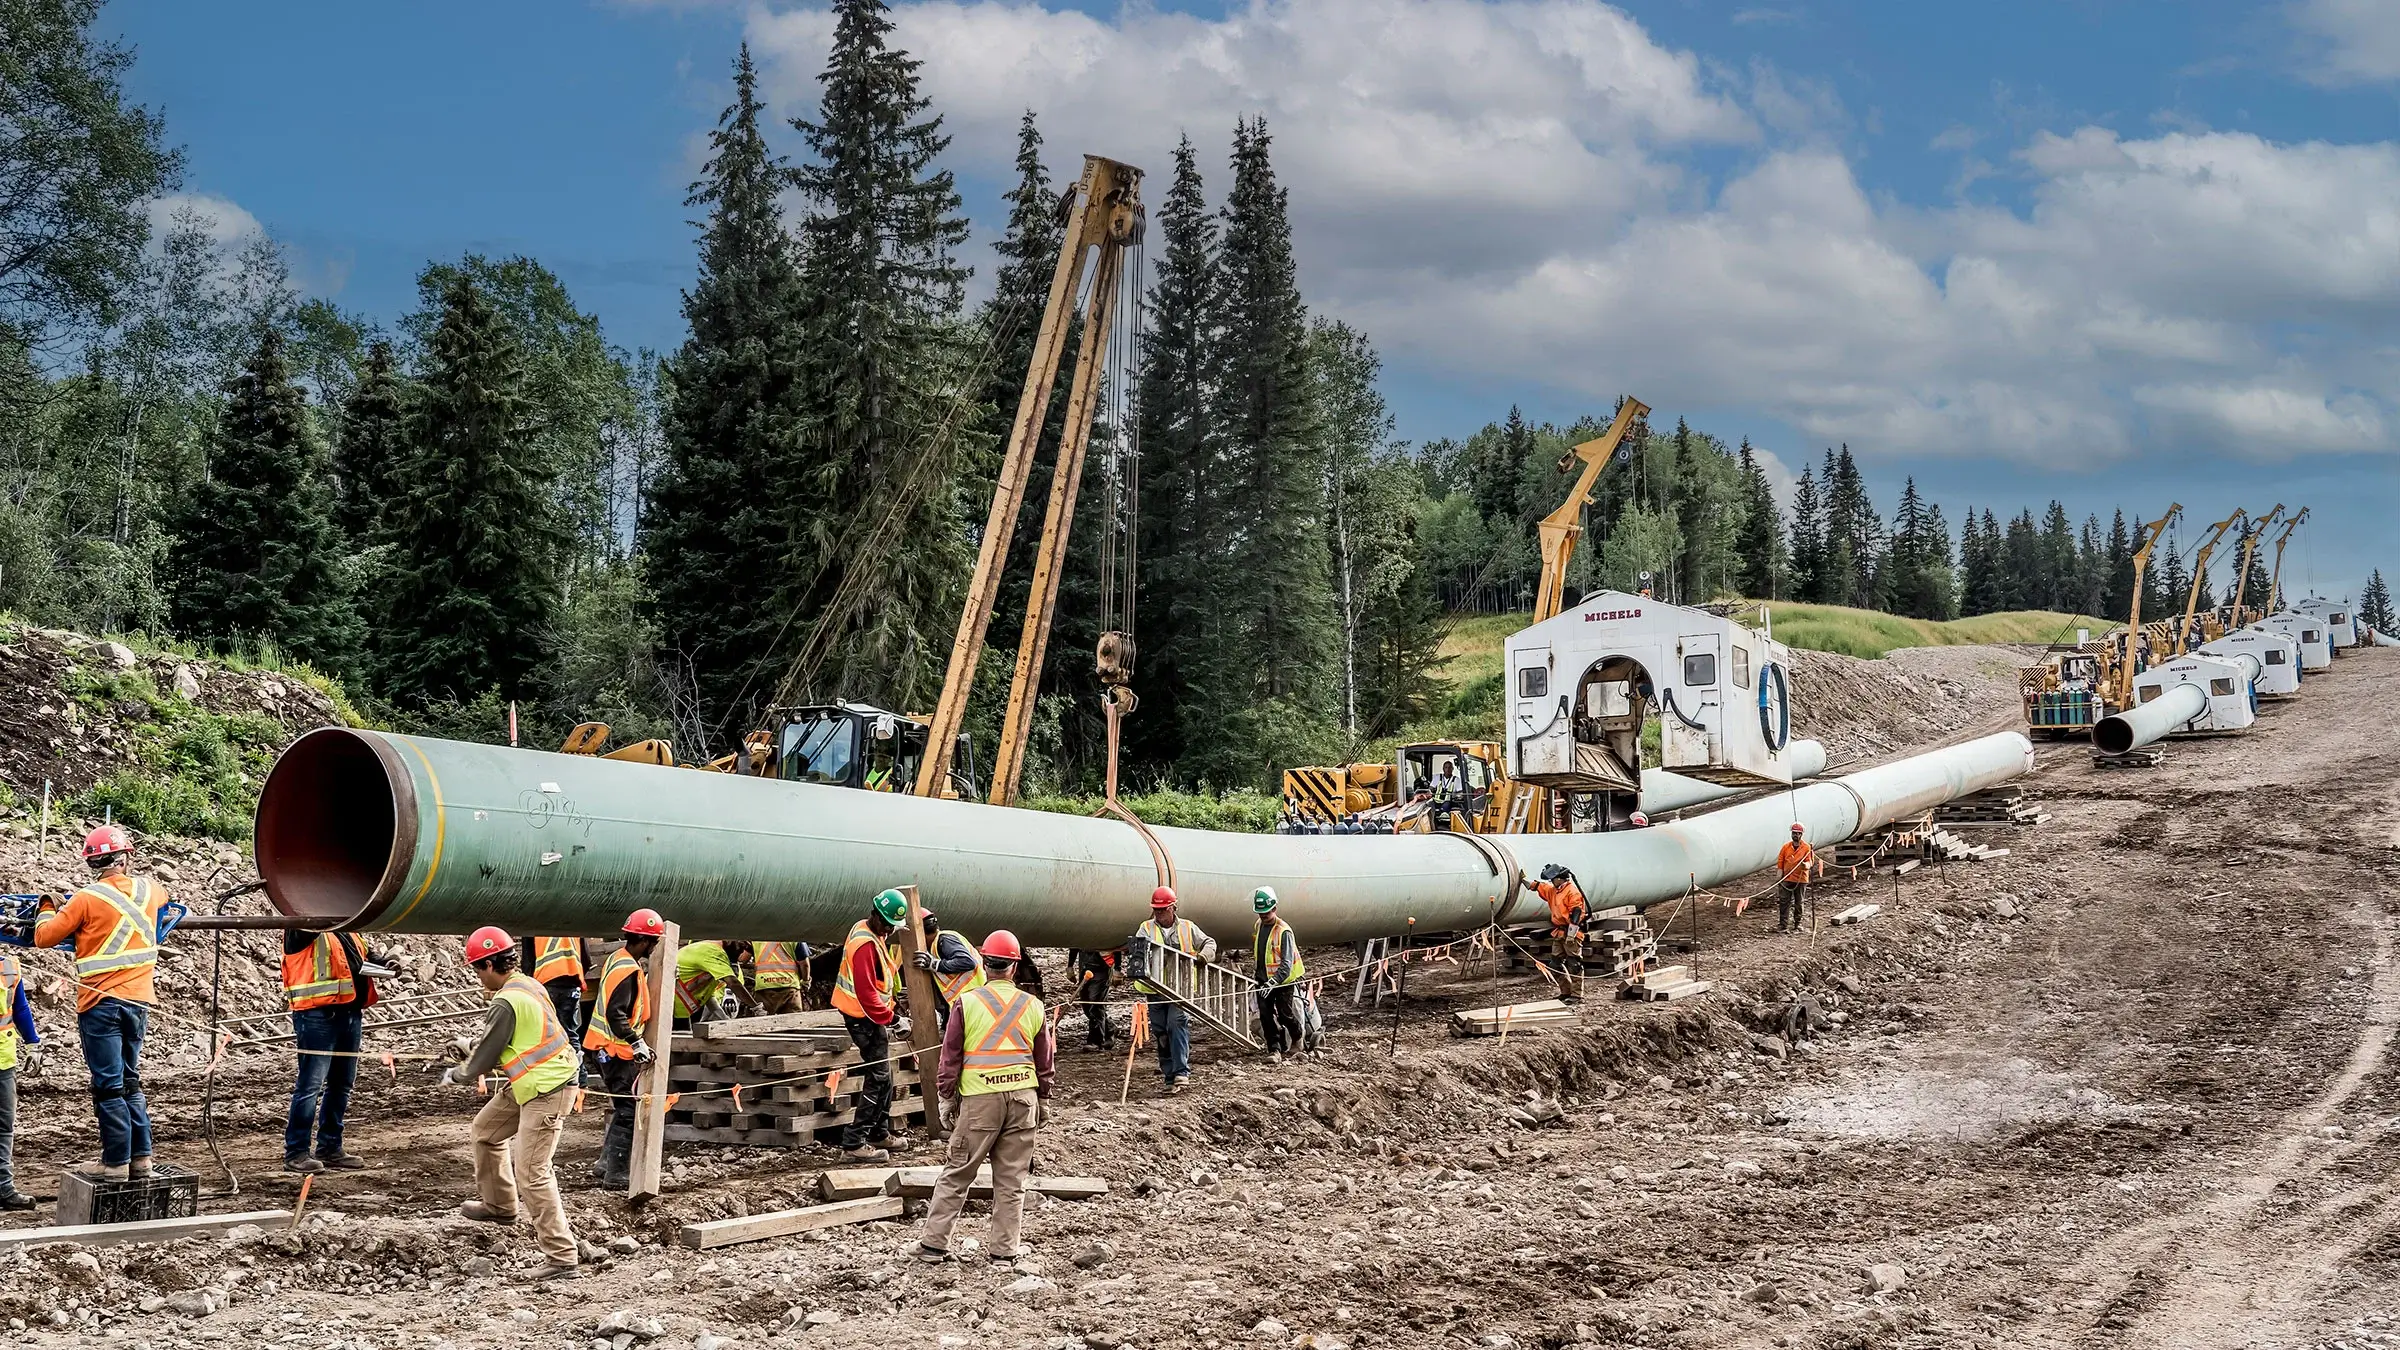 Workers operate along a long suspended pipeline in the forest.